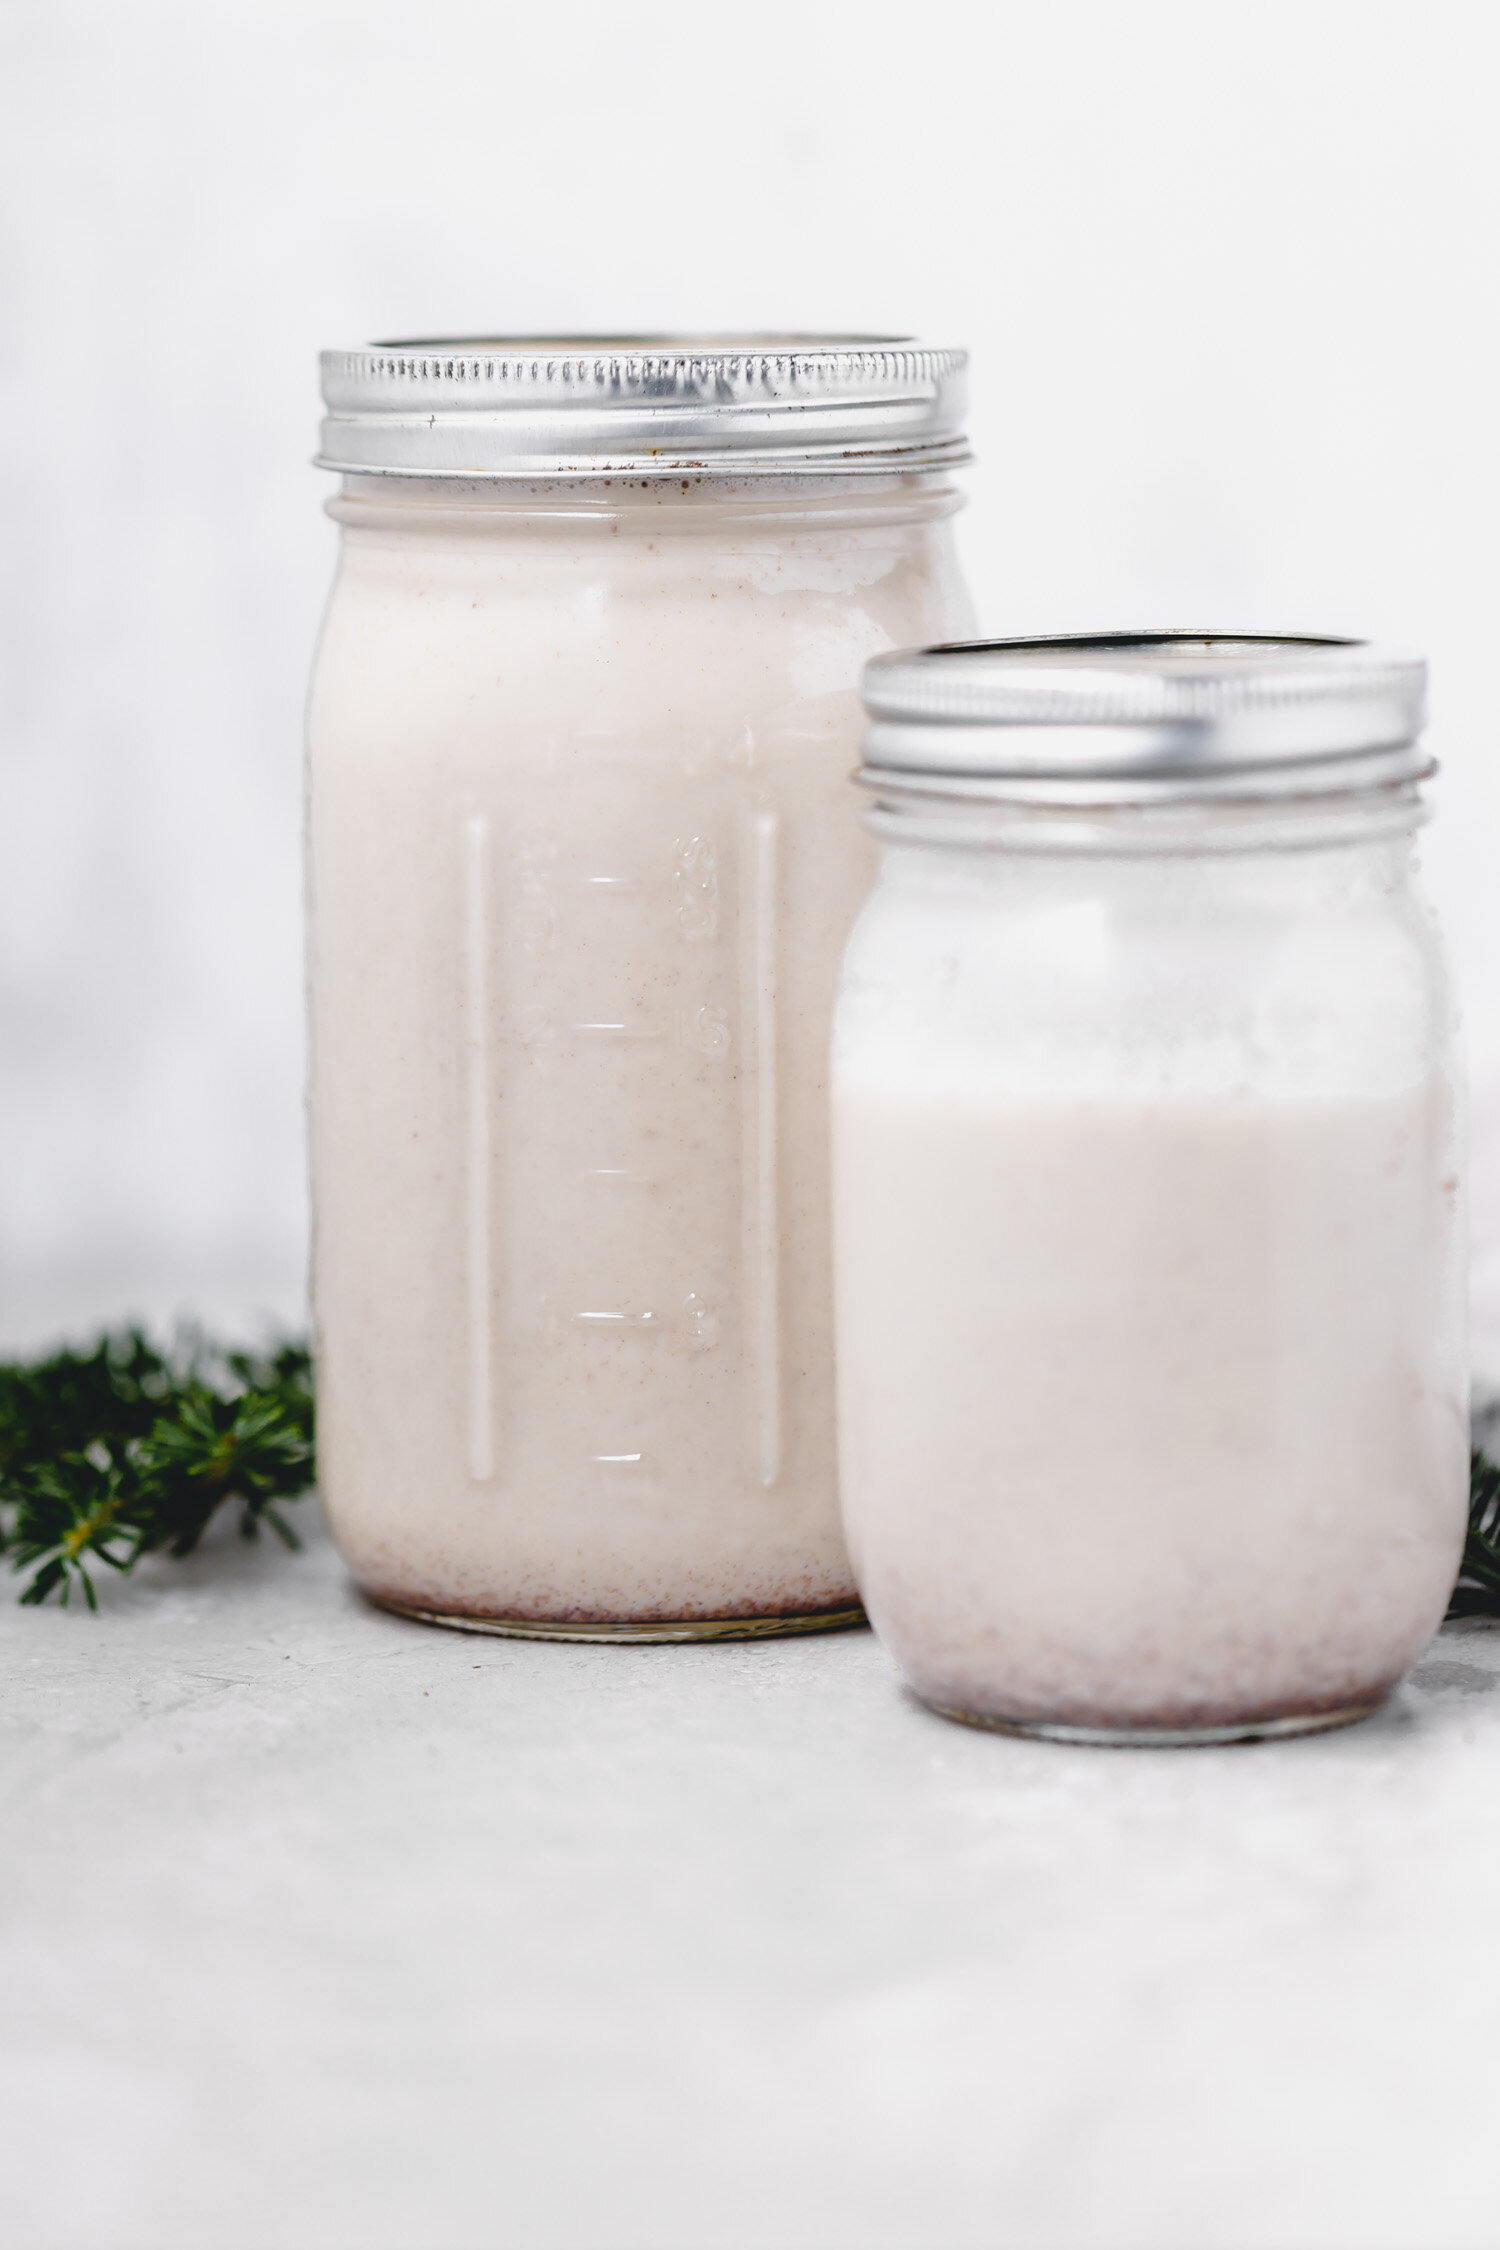 Vegan Eggnog in 10 Minutes - this recipe makes it easy to grab a cup of cheer right away!  Make a big batch in advance and store it in the fridge for later.    #eggnog #vegan #veganholiday #Christmas #veganeggnog #cupofcheer #nutmeg #dairyfree #drink #bourbon #quickandeasy #10minuterecipe #hotdrink #eggfree #holidaytreat #veganchristmas #nog #dairyfreeeggnog #holidayrecipe